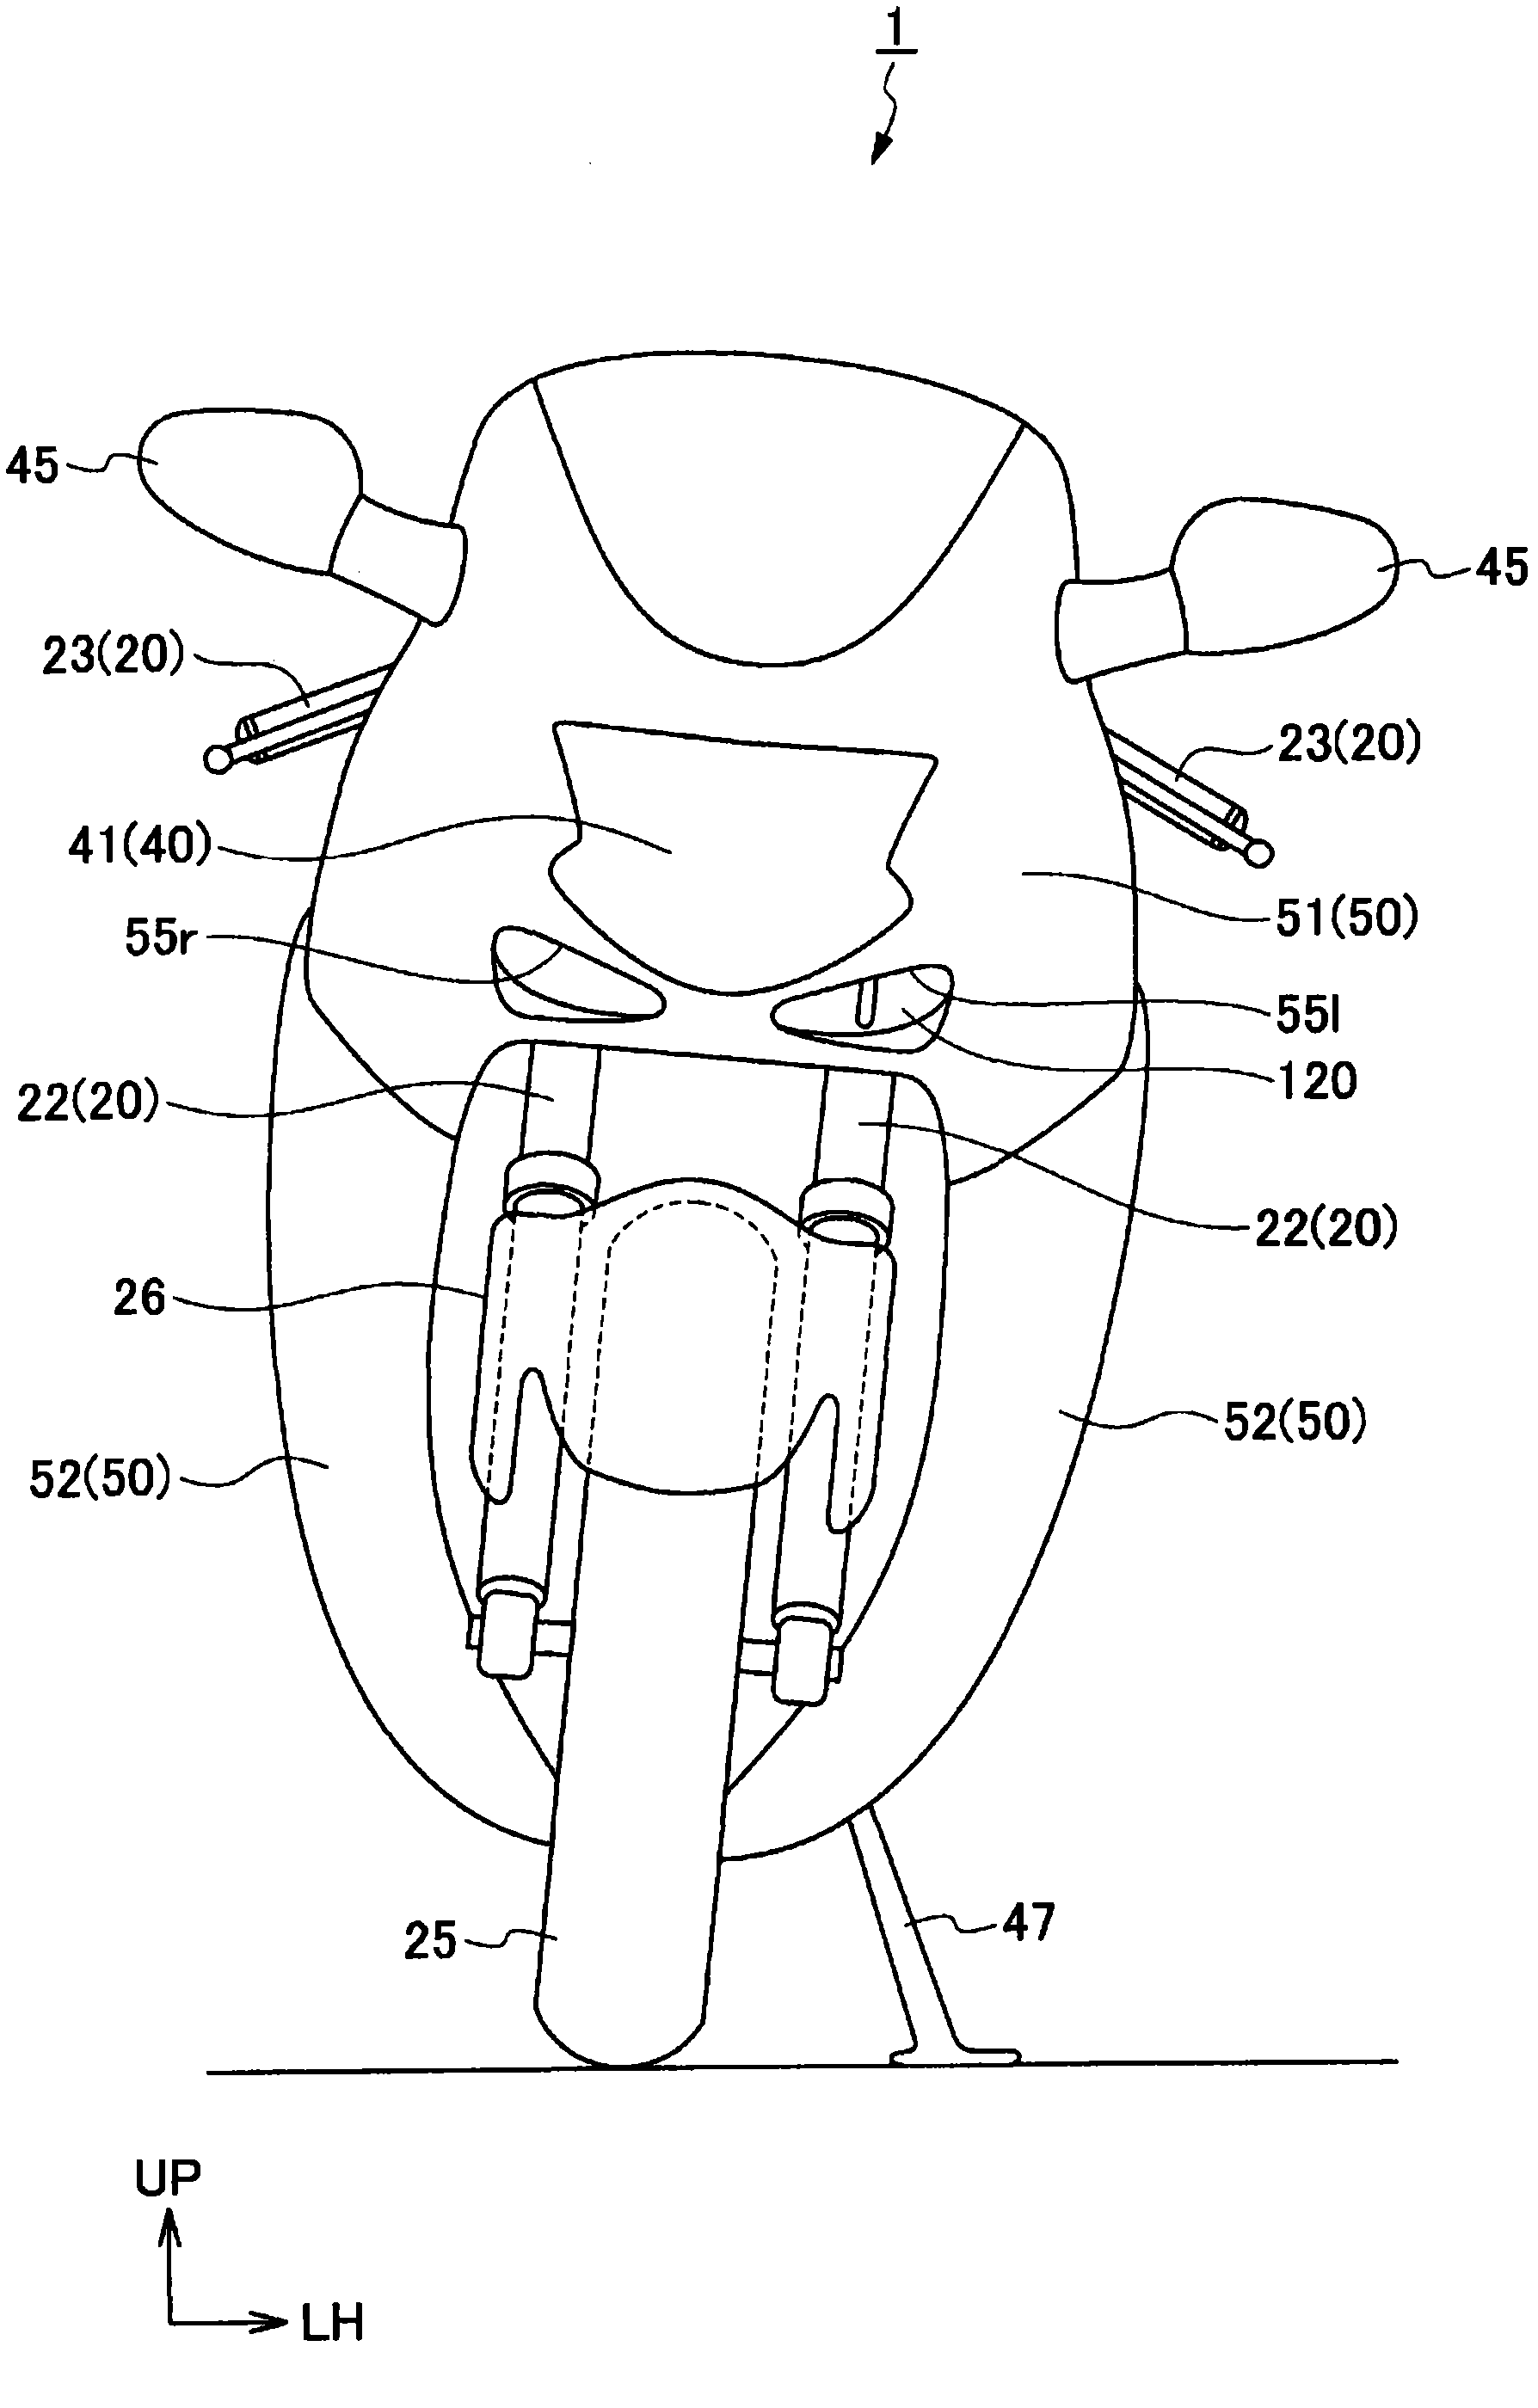 Storage structure for power connector for straddle-type vehicles